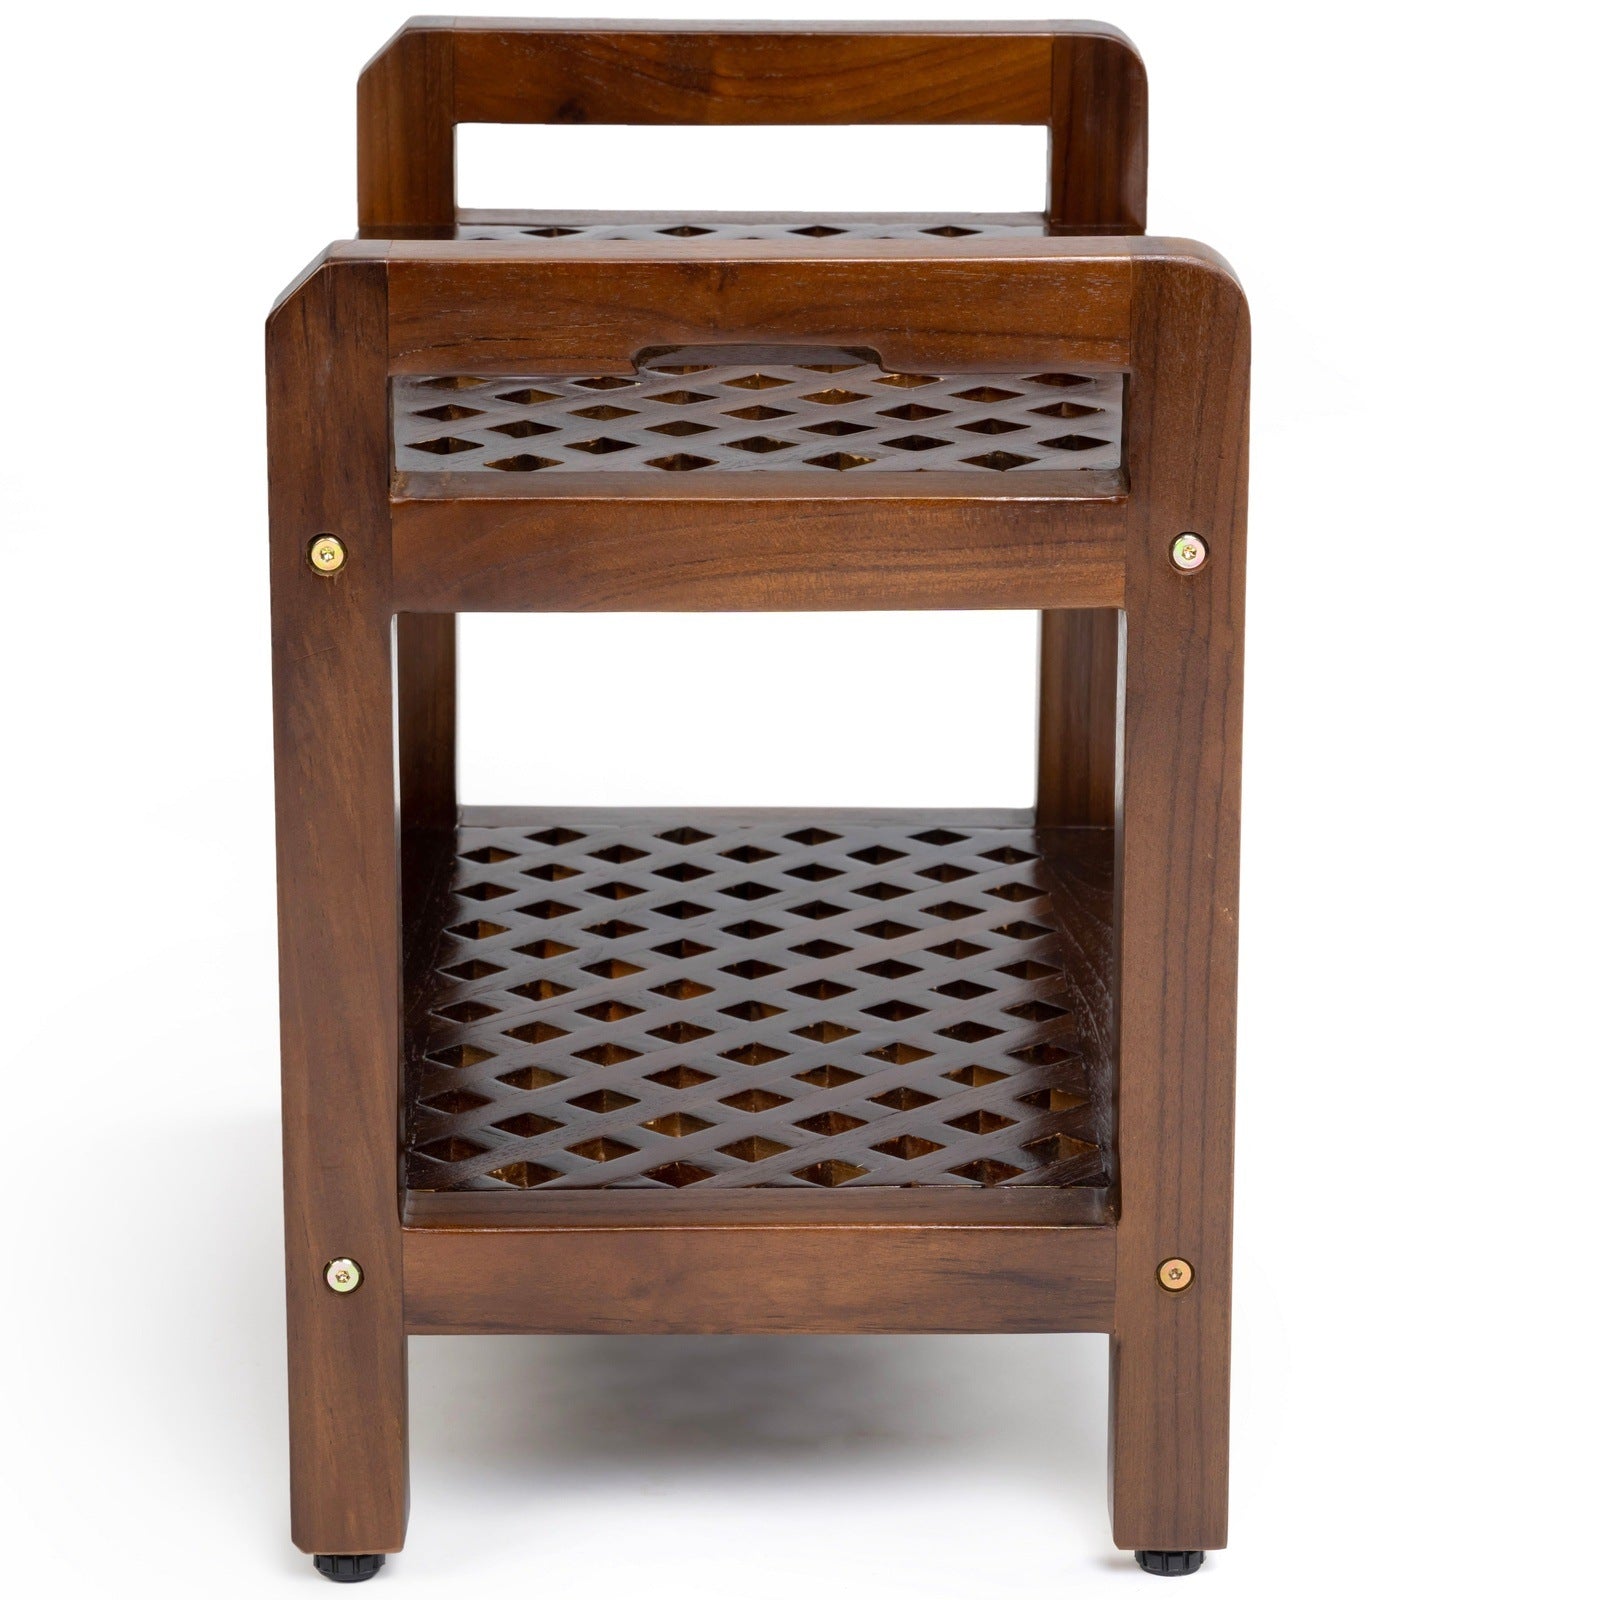 Ala Teak Shower Seat Bench with Storage Shelf for Seating, Support & Relaxation, Spa Bath Bench Stool Perfect for Indoor or Outdoor Use